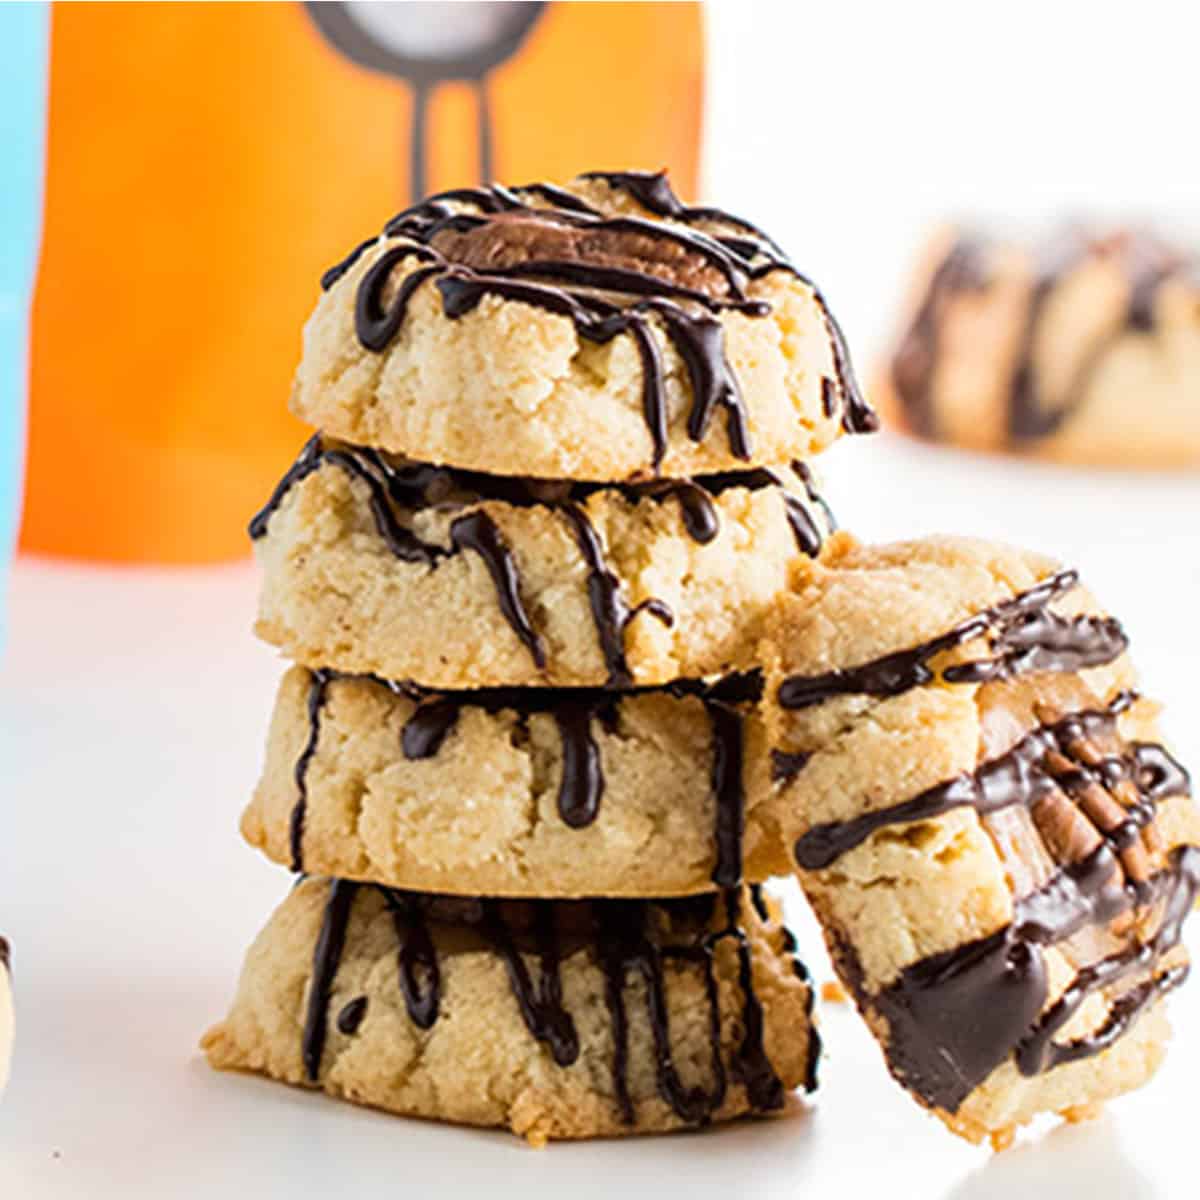 A stack of cookies with chocolate drizzled over them.